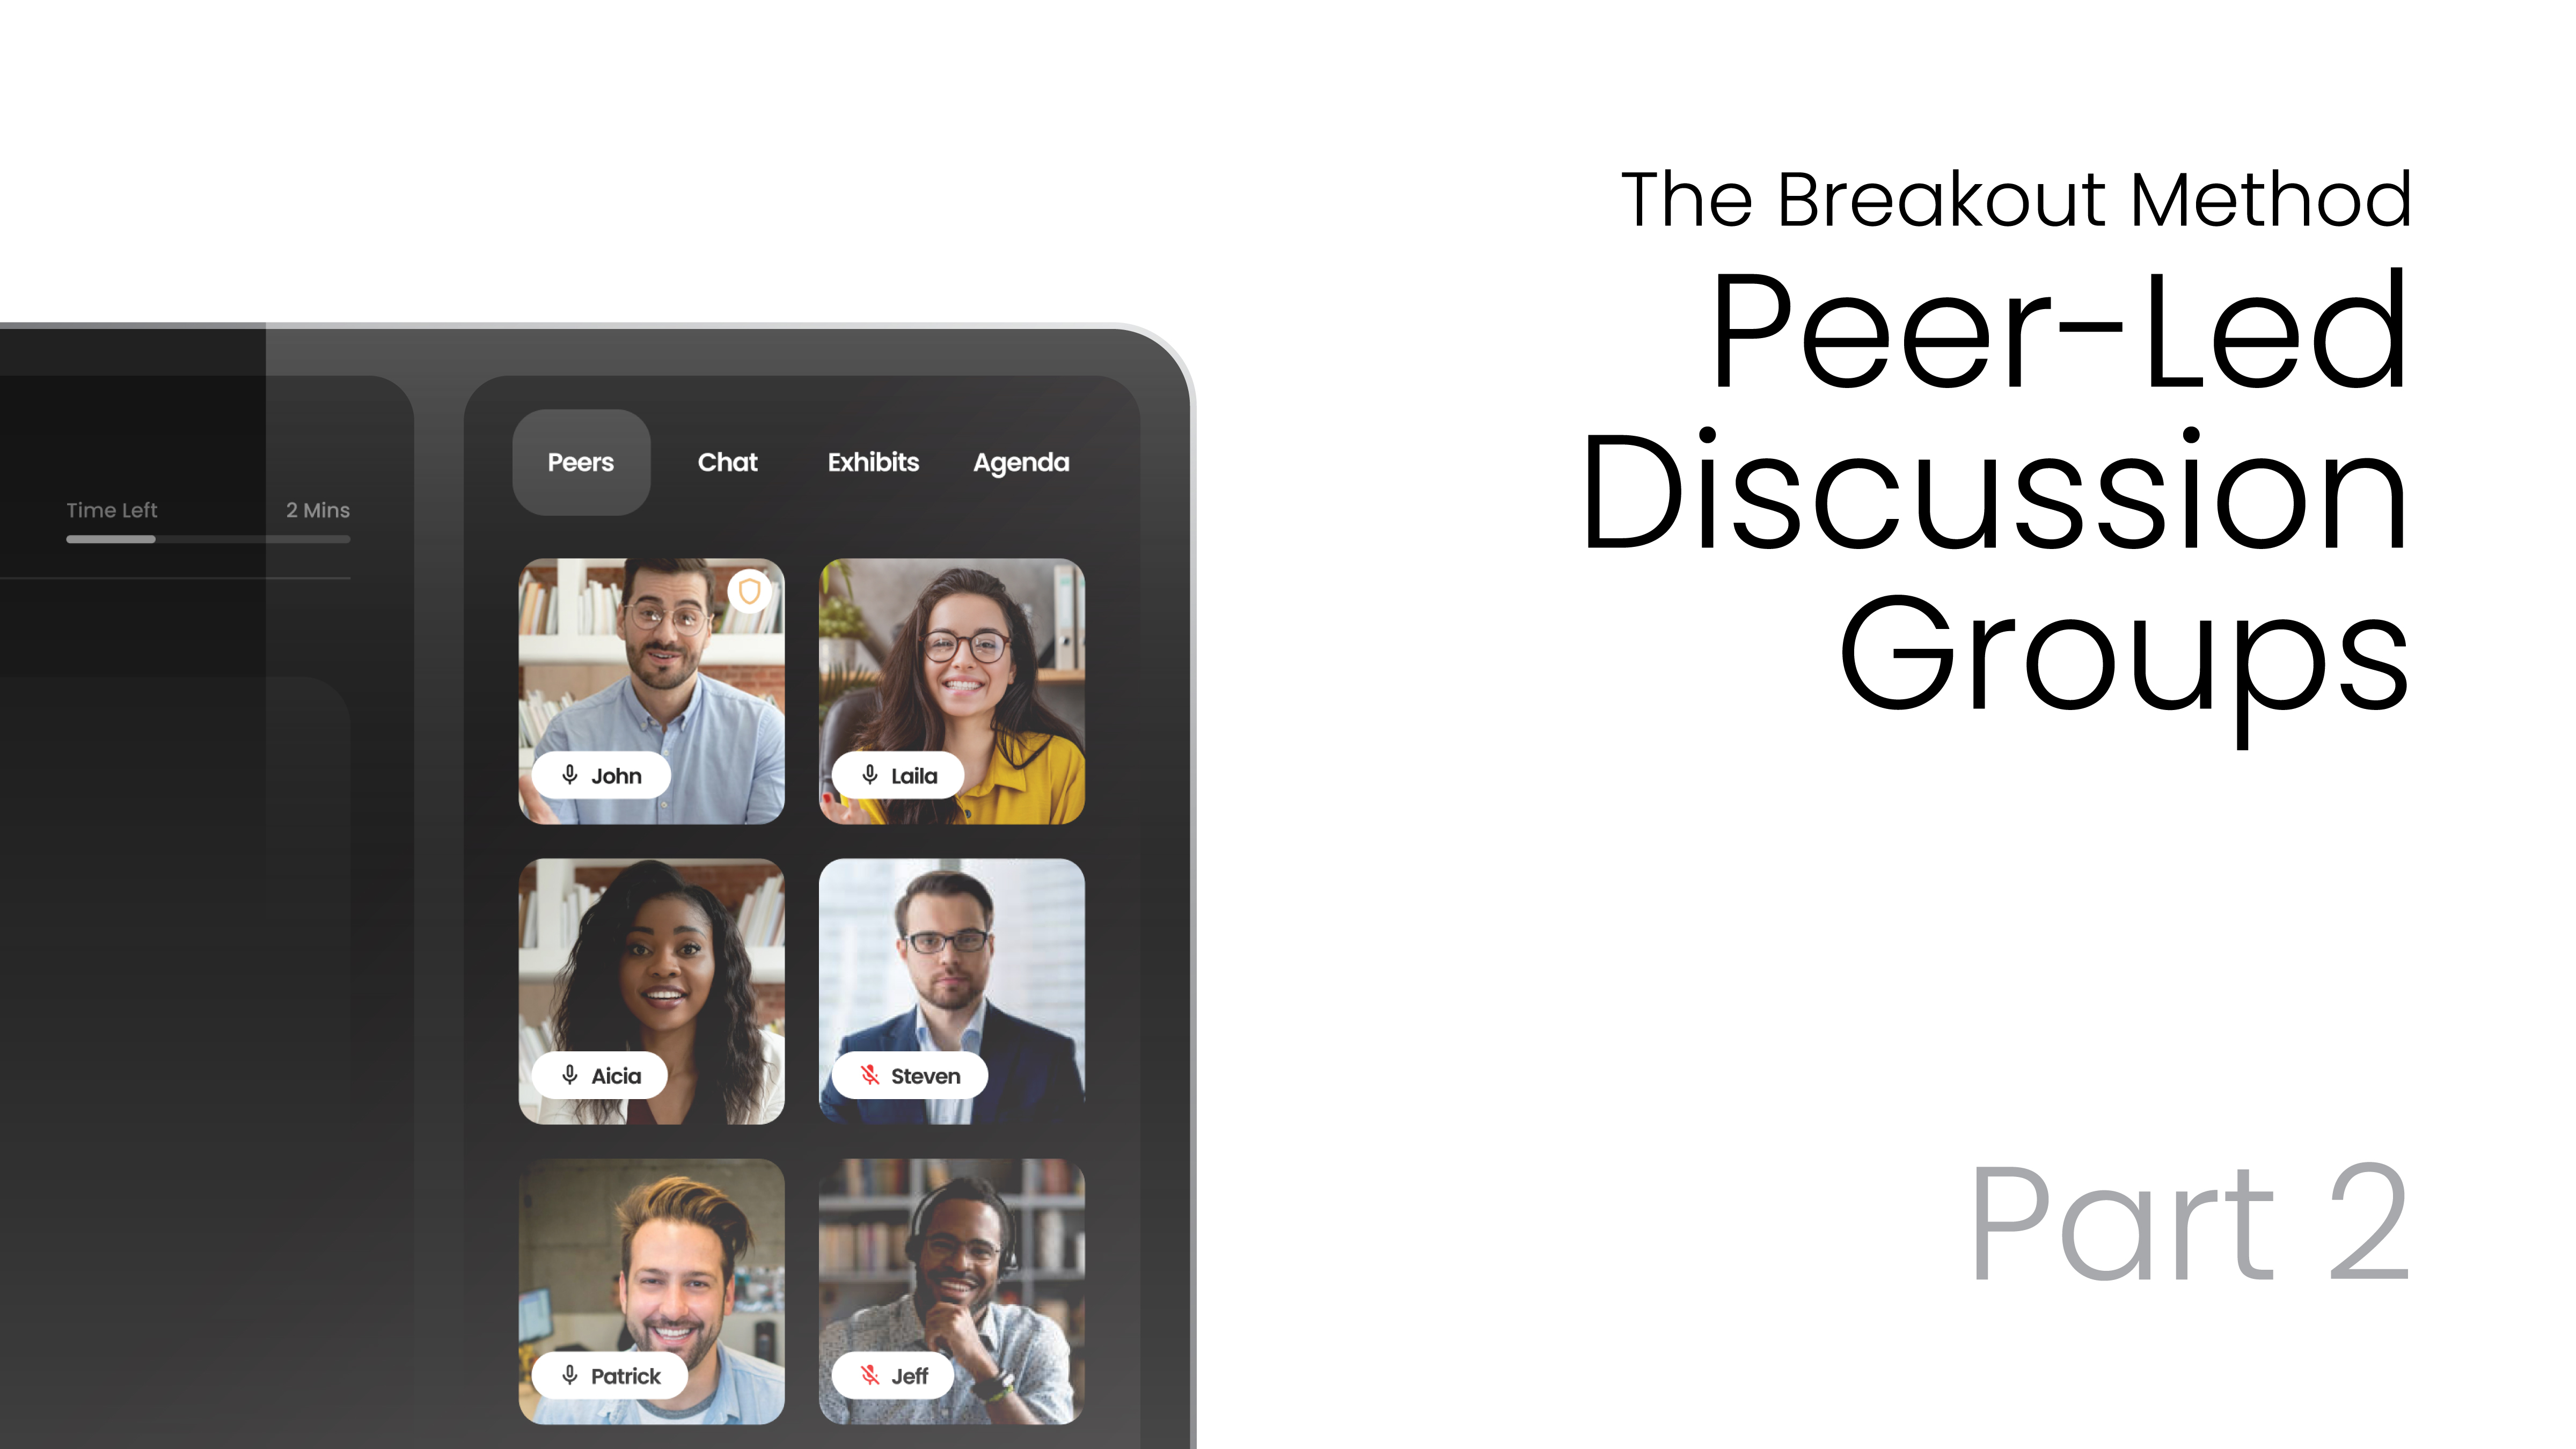 The Breakout Method: Part 2 – Peer-Led Discussion Groups